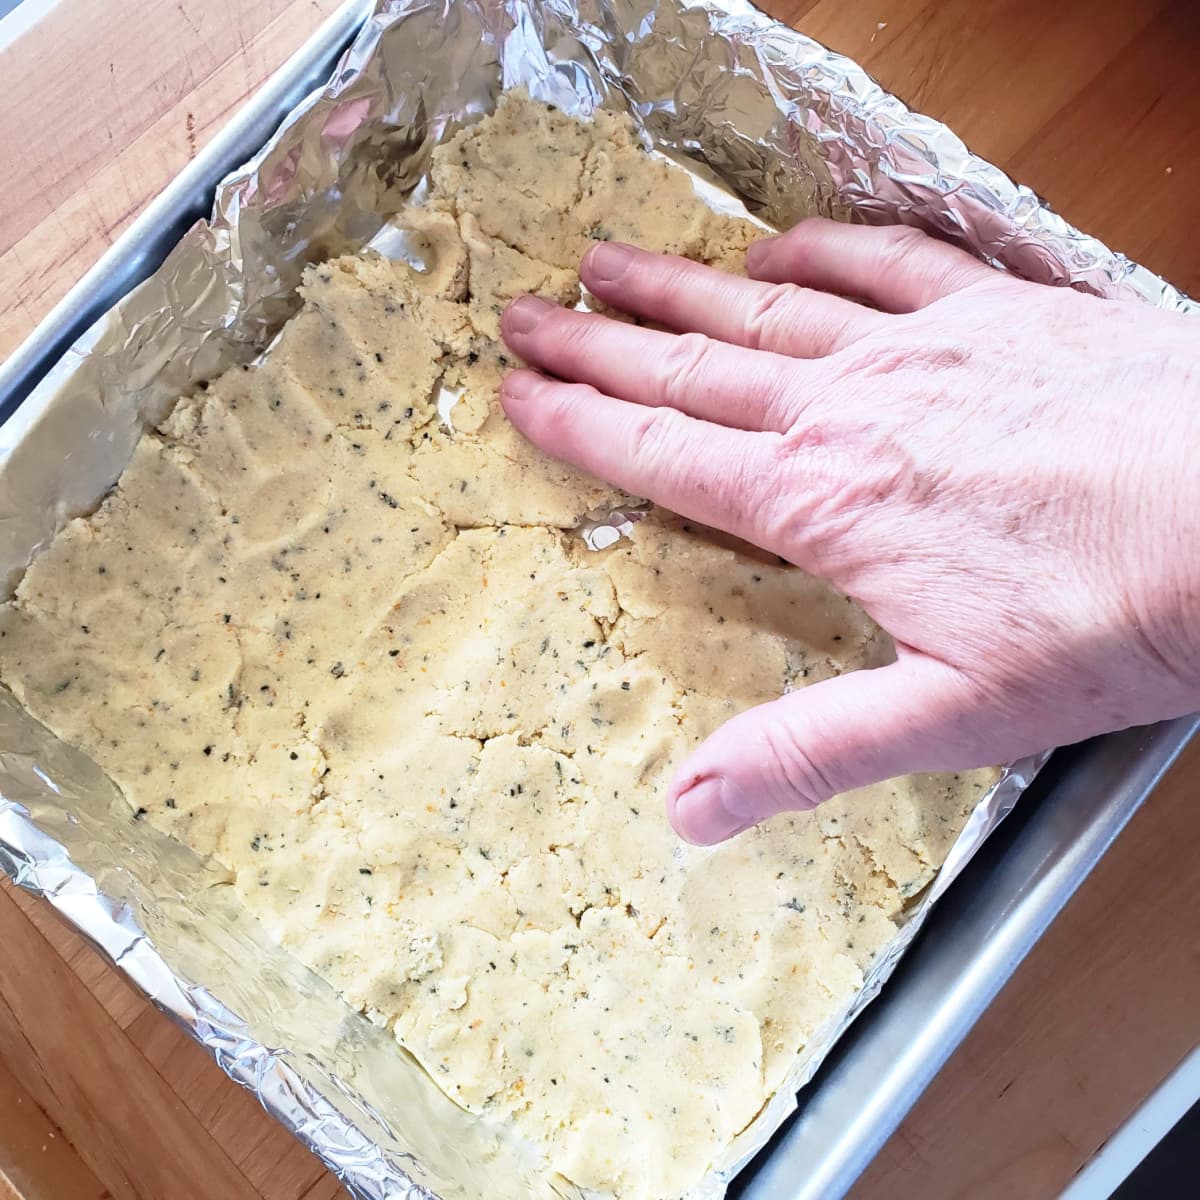 A hand with outstretched fingers pats dough into a silver foil-lined baking pan